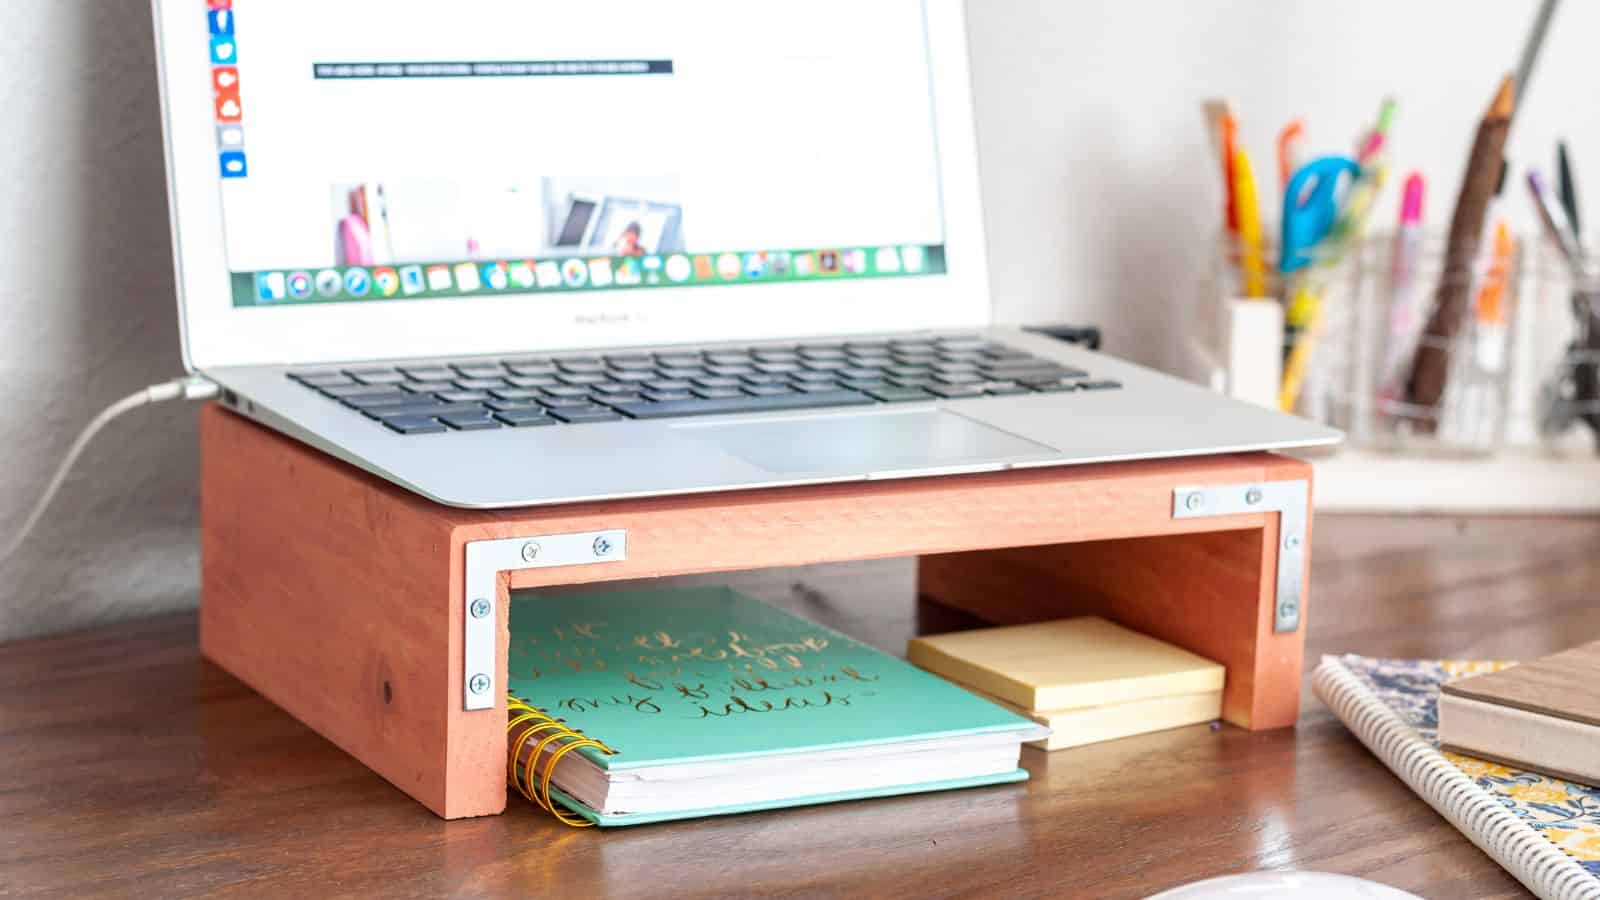 <p>This is the perfect beginner project for kids to make. It uses simple tools and scrap wood. All they need to do is cut the boards and attach them using nails. They will be proud to do homework using a laptop stand they made themselves. <a href="https://www.anikasdiylife.com/diy-laptop-stand-for-desk/">Plans to make it here.</a></p>